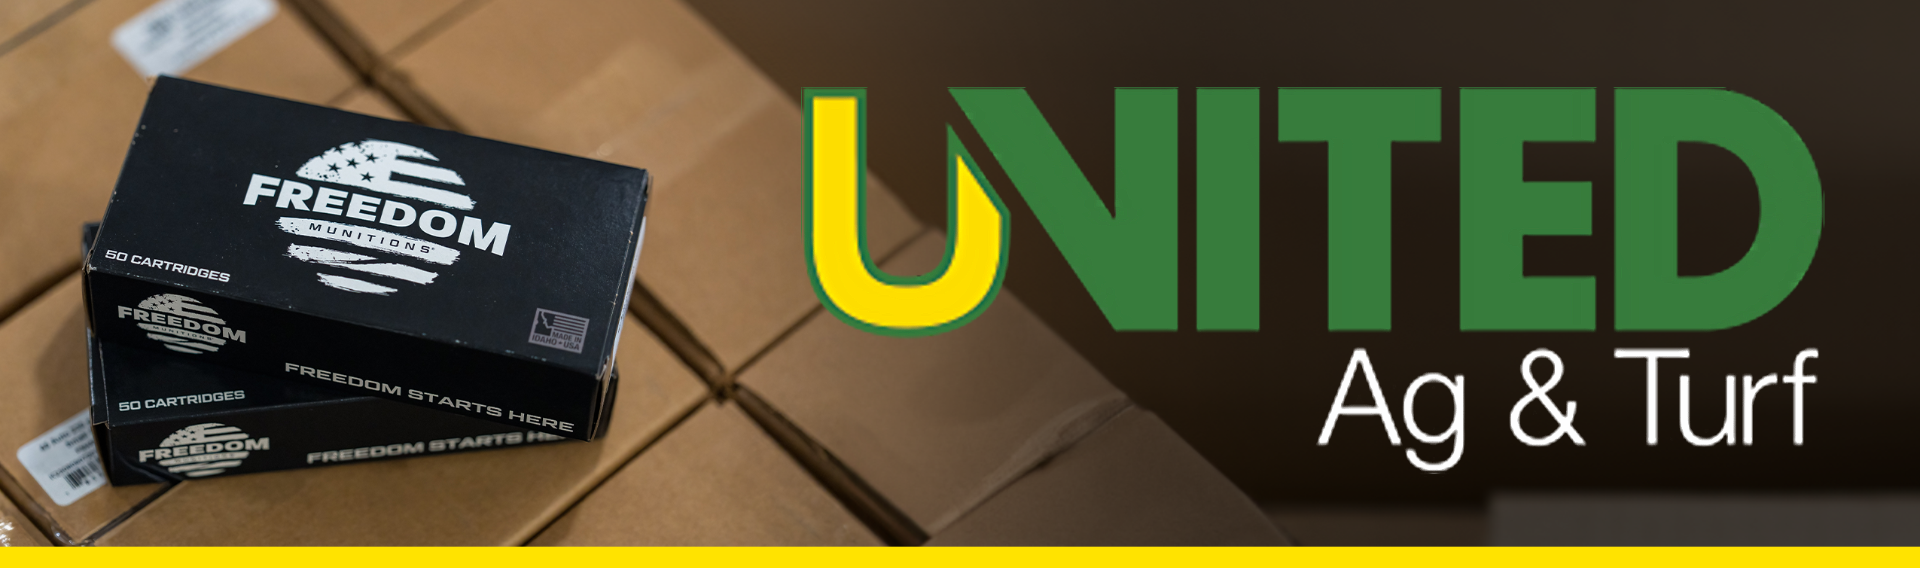 Freedom Munitions ammo now available in select United Ag & Turf stores. Live near a store? Visit them and save on shipping!